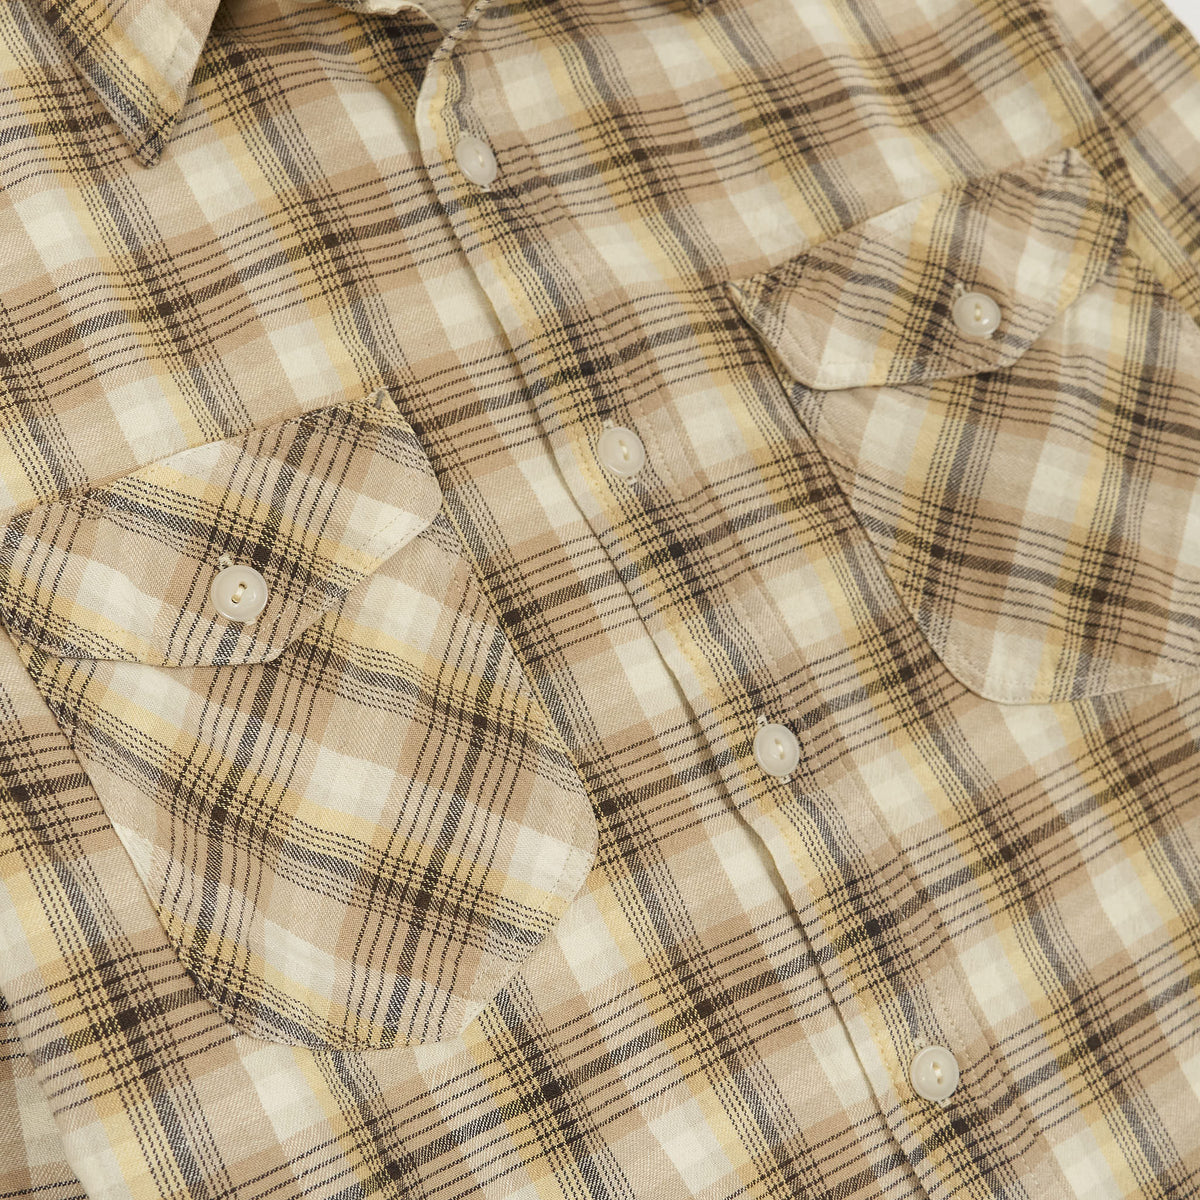 Double RL Checked Workshirt